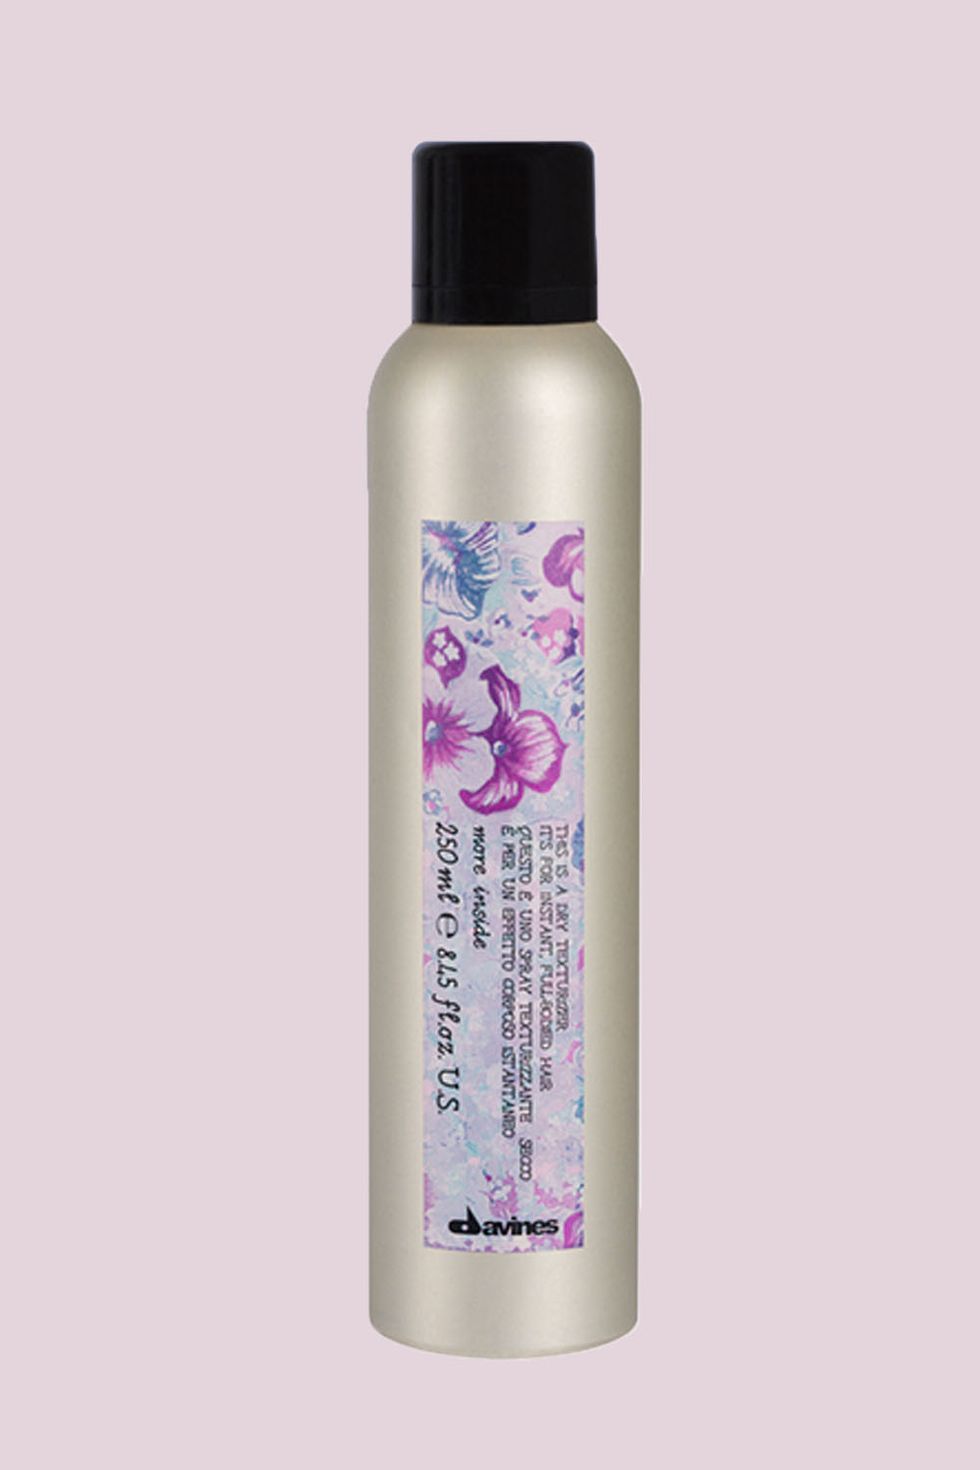 <p>Real Talk: Dry shampoo is just as much of a styling product as it is a cleanser. In fact, pro&nbsp;stylists love using it on squeaky-clean strands for some of that two-day-old grit. However, lightweight dry texture sprays will give you that same piece-y, cool-girl look in invisible fashion AKA you don't have to go full-on George Washington and sacrifice shine.</p><p><strong data-redactor-tag="strong" data-verified="redactor">Try: </strong>Davines This Is a Dry Texturizer, $32; us. davines.com.</p>